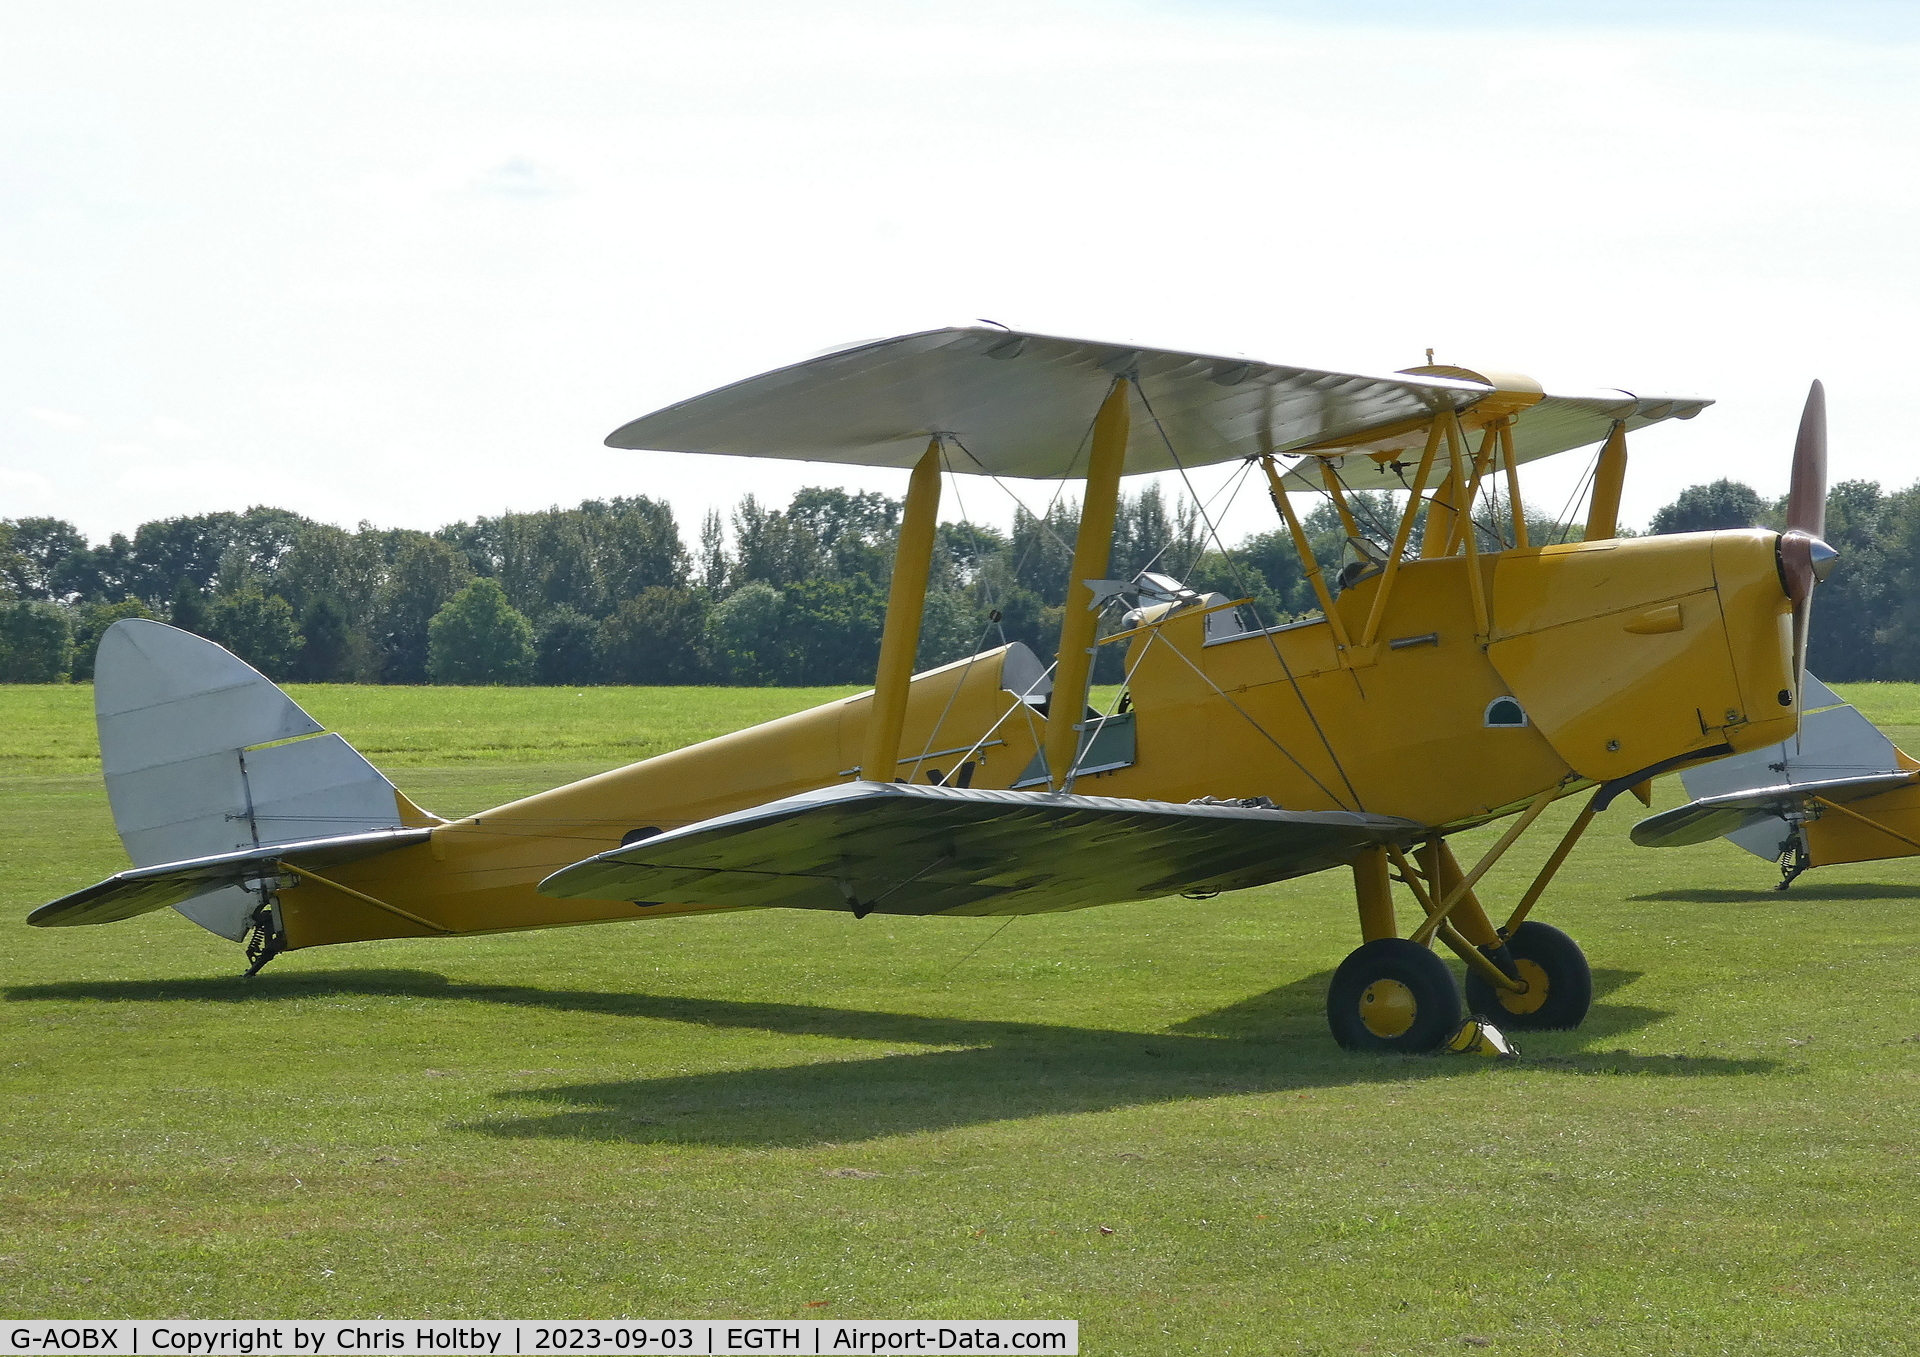 G-AOBX, 1940 De Havilland DH-82A Tiger Moth II C/N 83653, At Old Warden to take part in the Vintage Airshow 2023